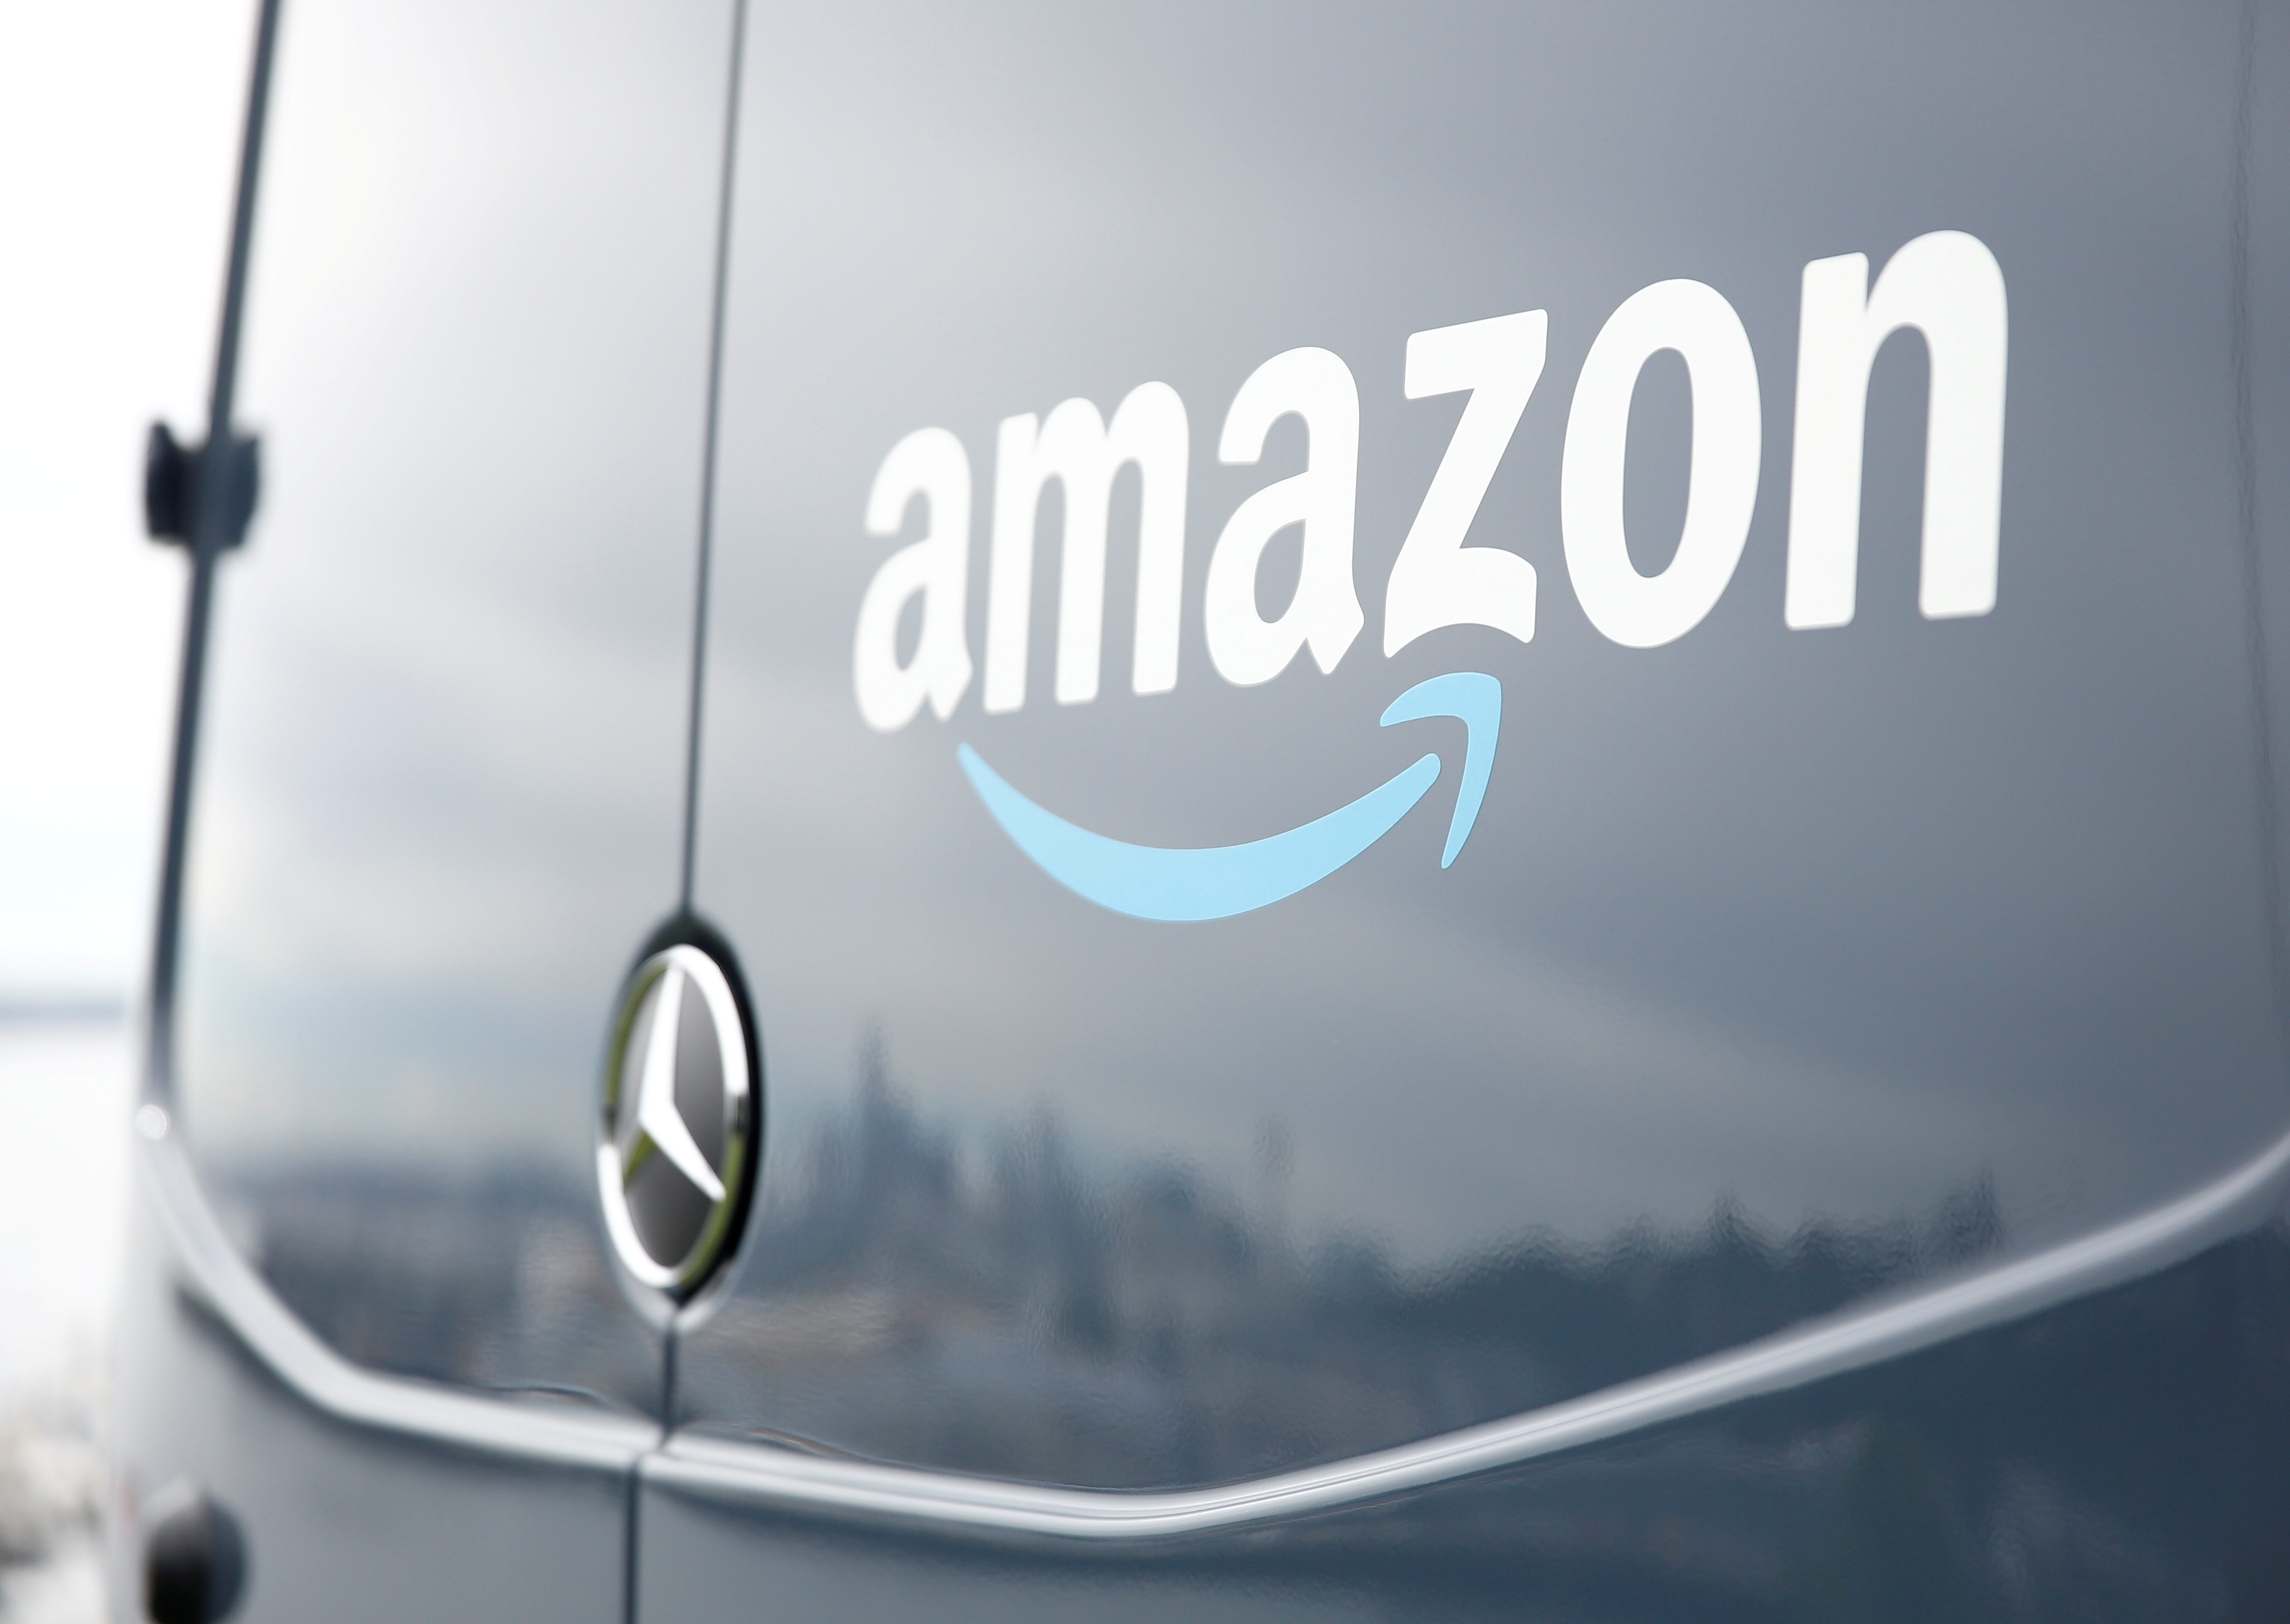 Amazon to proactively remove more content that violates rules from cloud service – sources